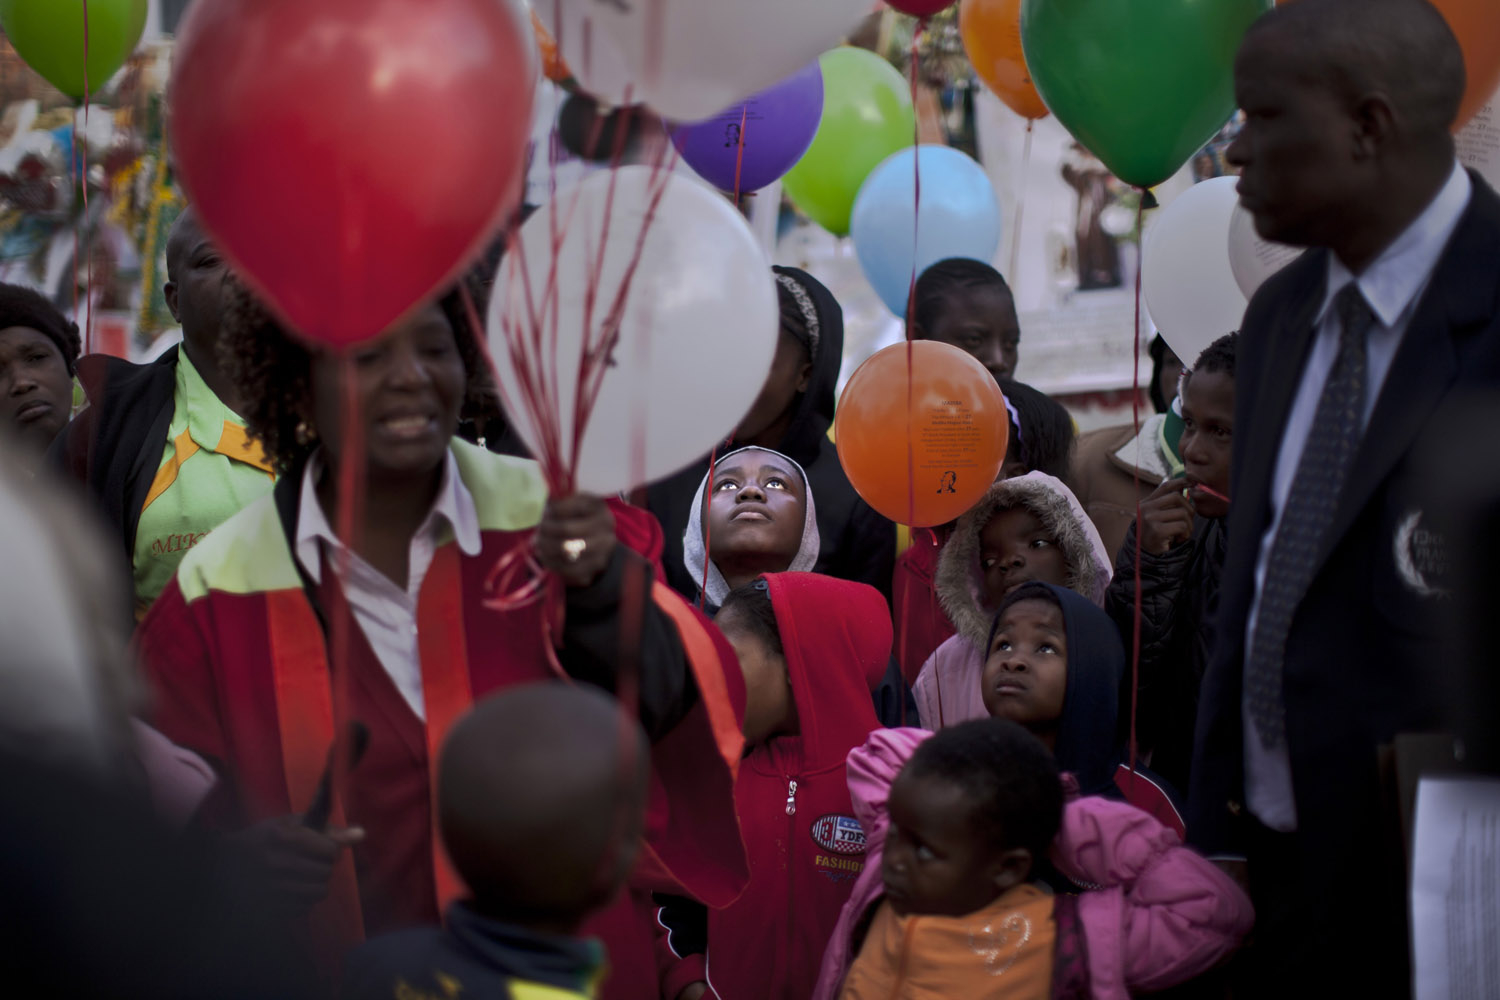 July 5, 2013. Children, a choir and other well-wishers hold balloons to release them to mark former South African President Nelson Mandela completing his 27th day in the hospital, correlating with the 27 years he spent in prison during the apartheid era, outside the Mediclinic Heart Hospital where he was being treated in Pretoria, South Africa.